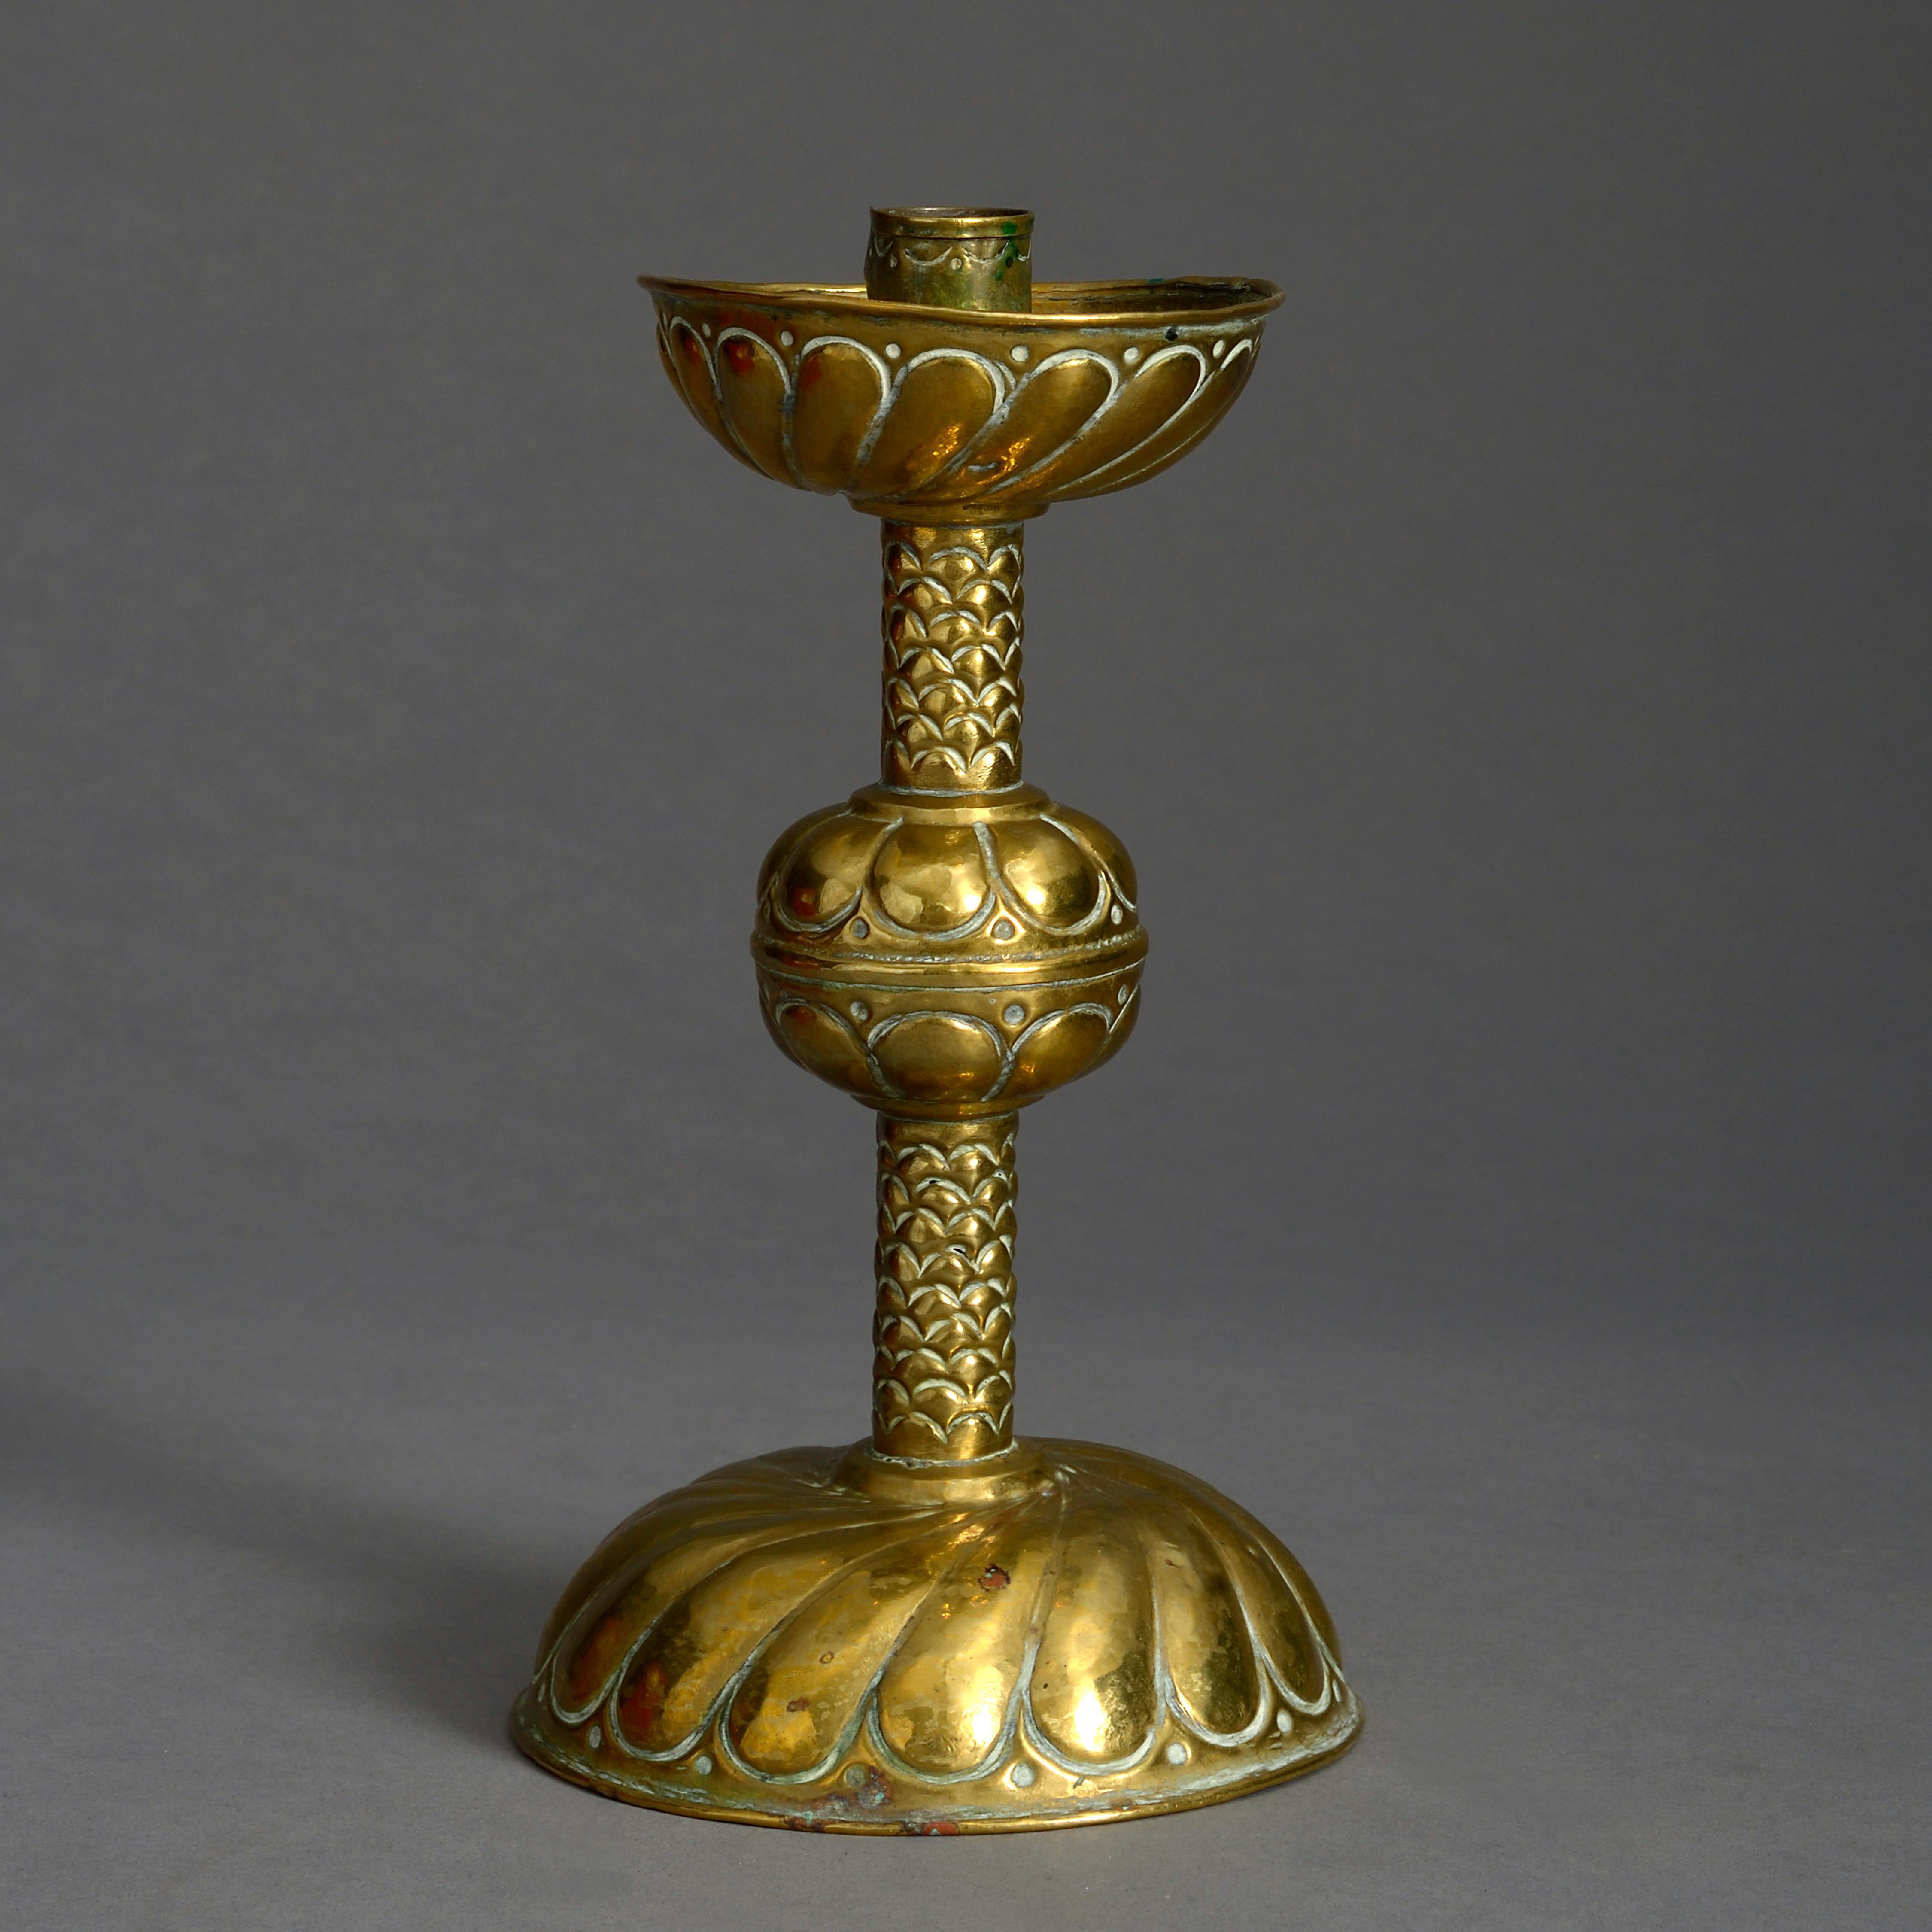 A late 17th century brass candlestick, the dished top above a stem with fish scale decoration, set upon a gadrooned base.